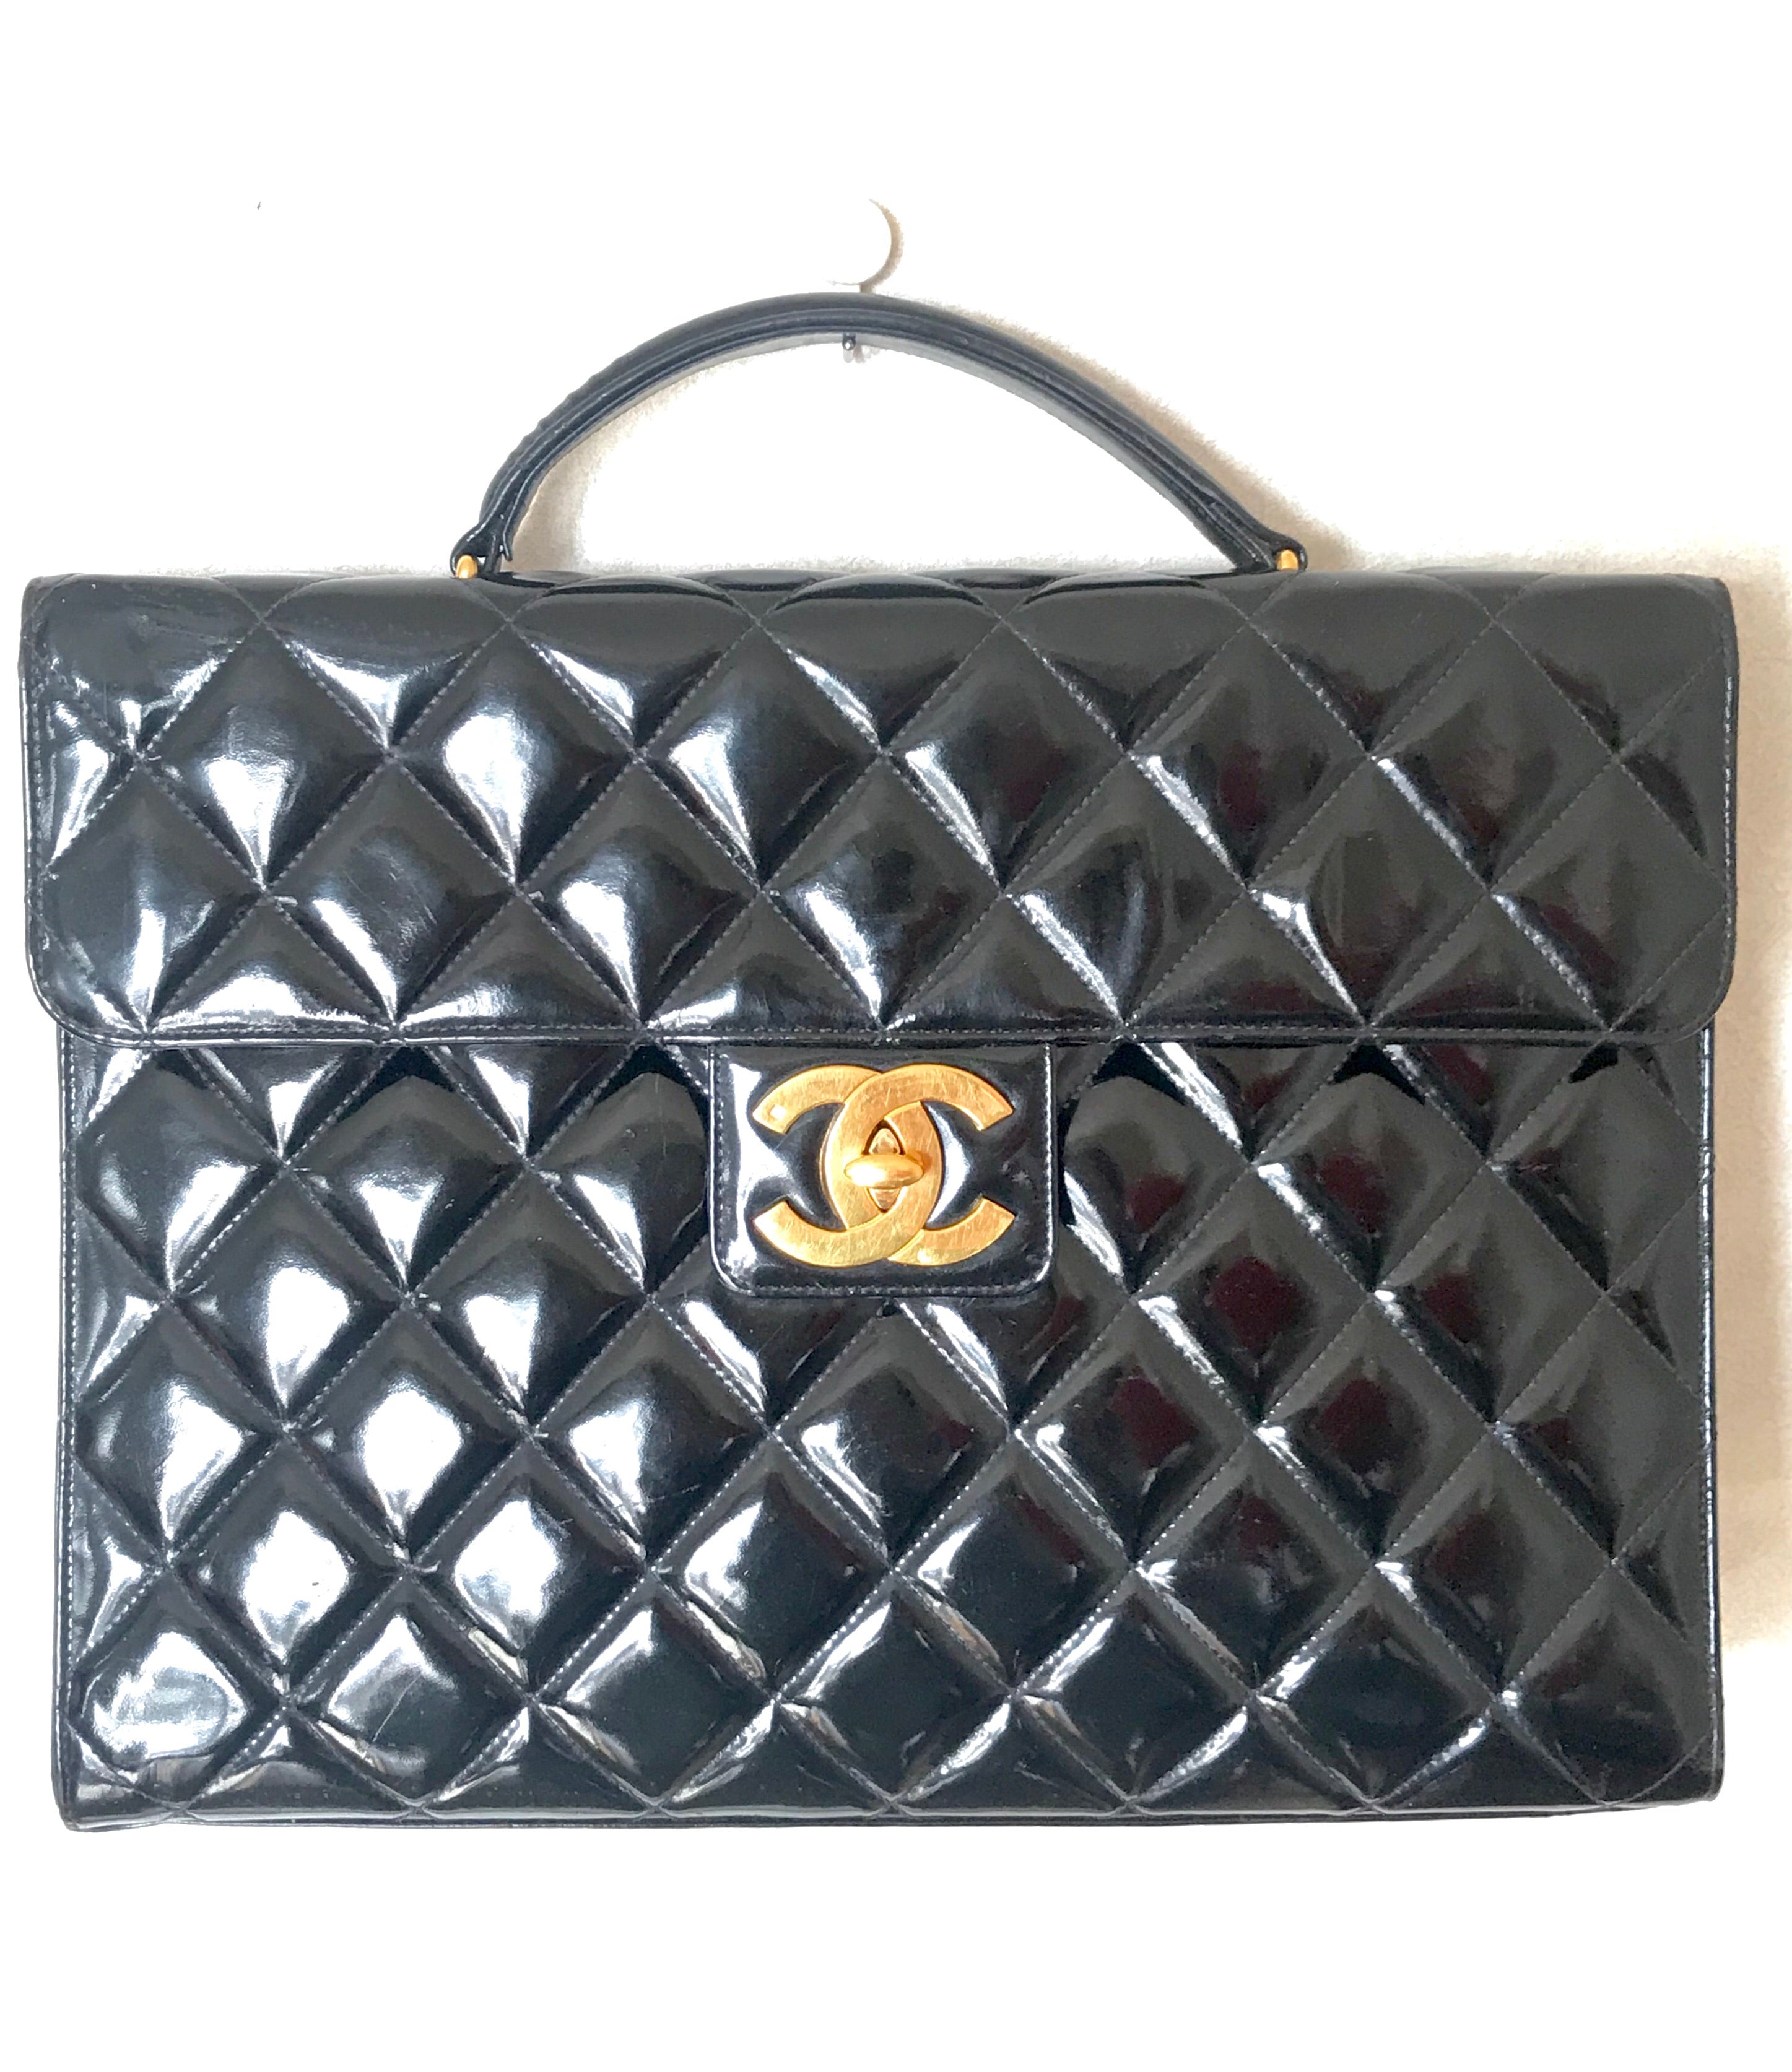 CHANEL Black 90s Theme Bags & Handbags for Women, Authenticity Guaranteed